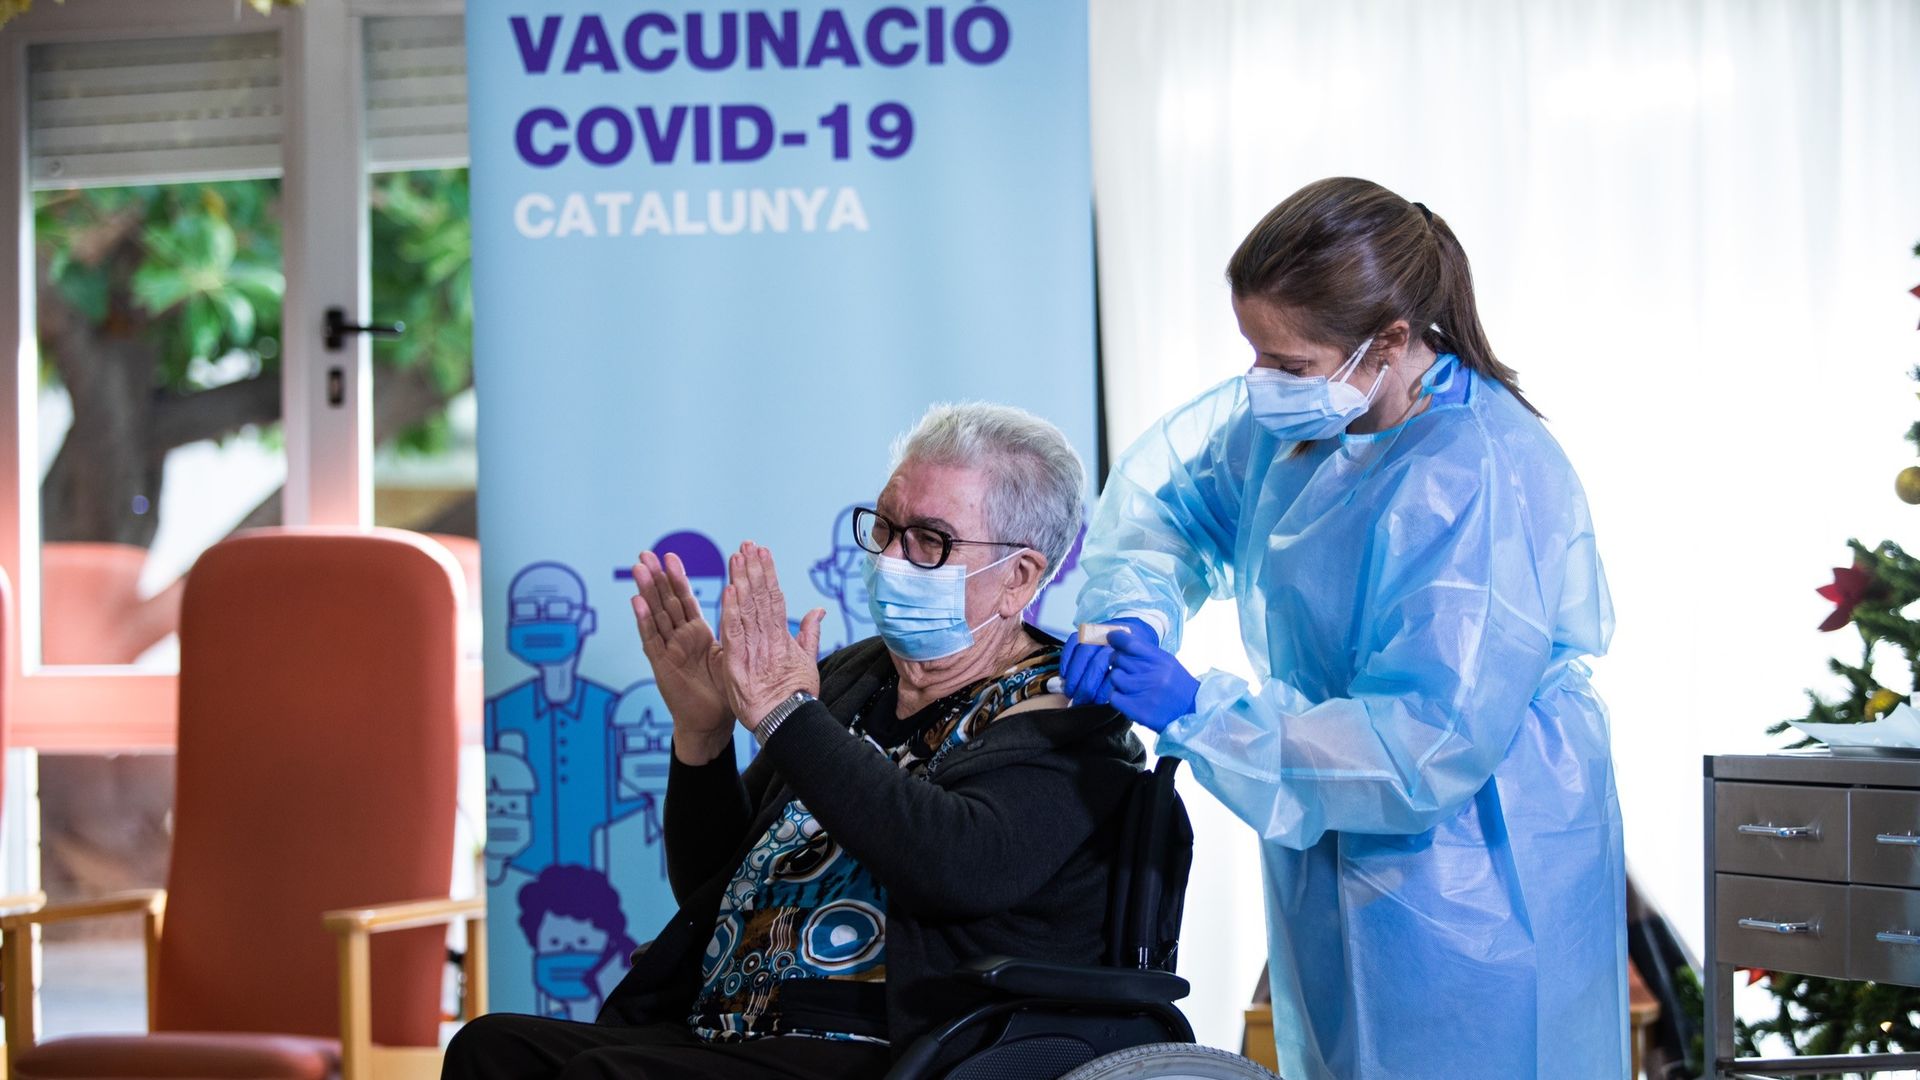 Josefa Perez, 89, is the first woman to be vaccinated in Catalonia, on Sunday